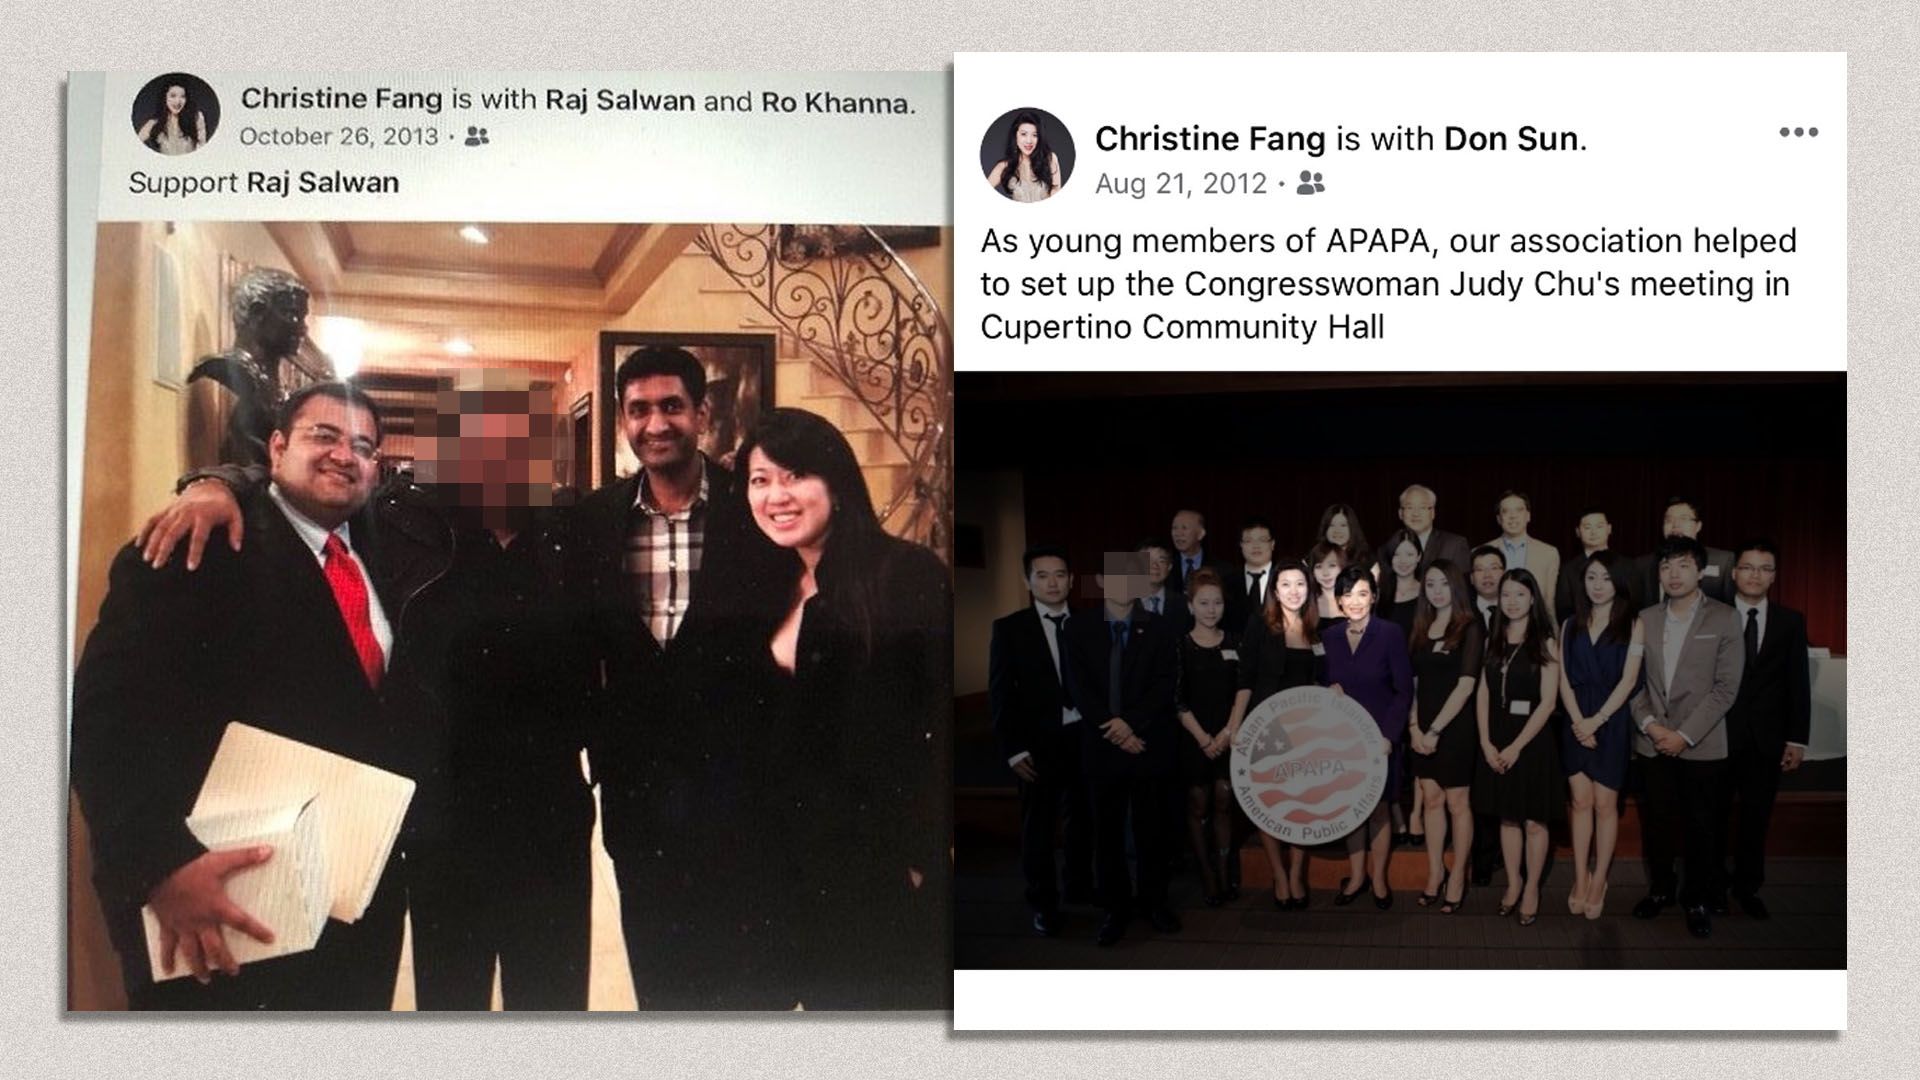 Photo of Fang with Salwan and Khanna and of Fang with Chu and APAPA